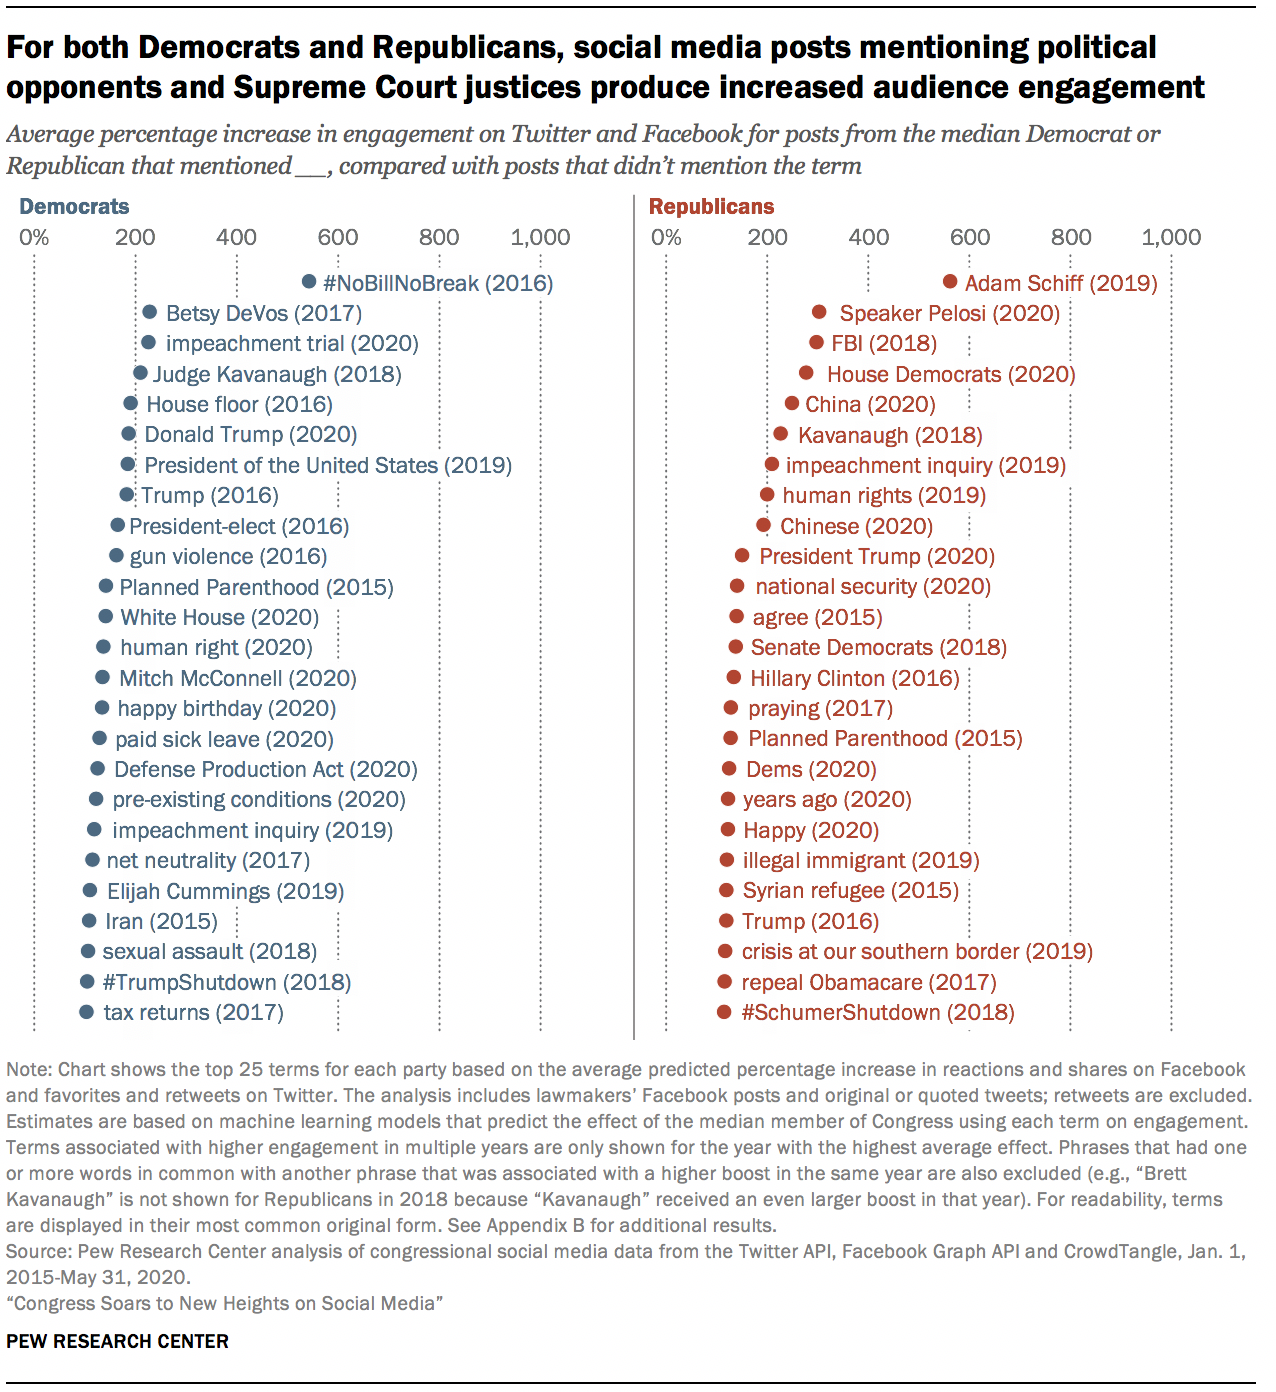 For both Democrats and Republicans, social media posts mentioning political opponents and Supreme Court justices produce increased audience engagement